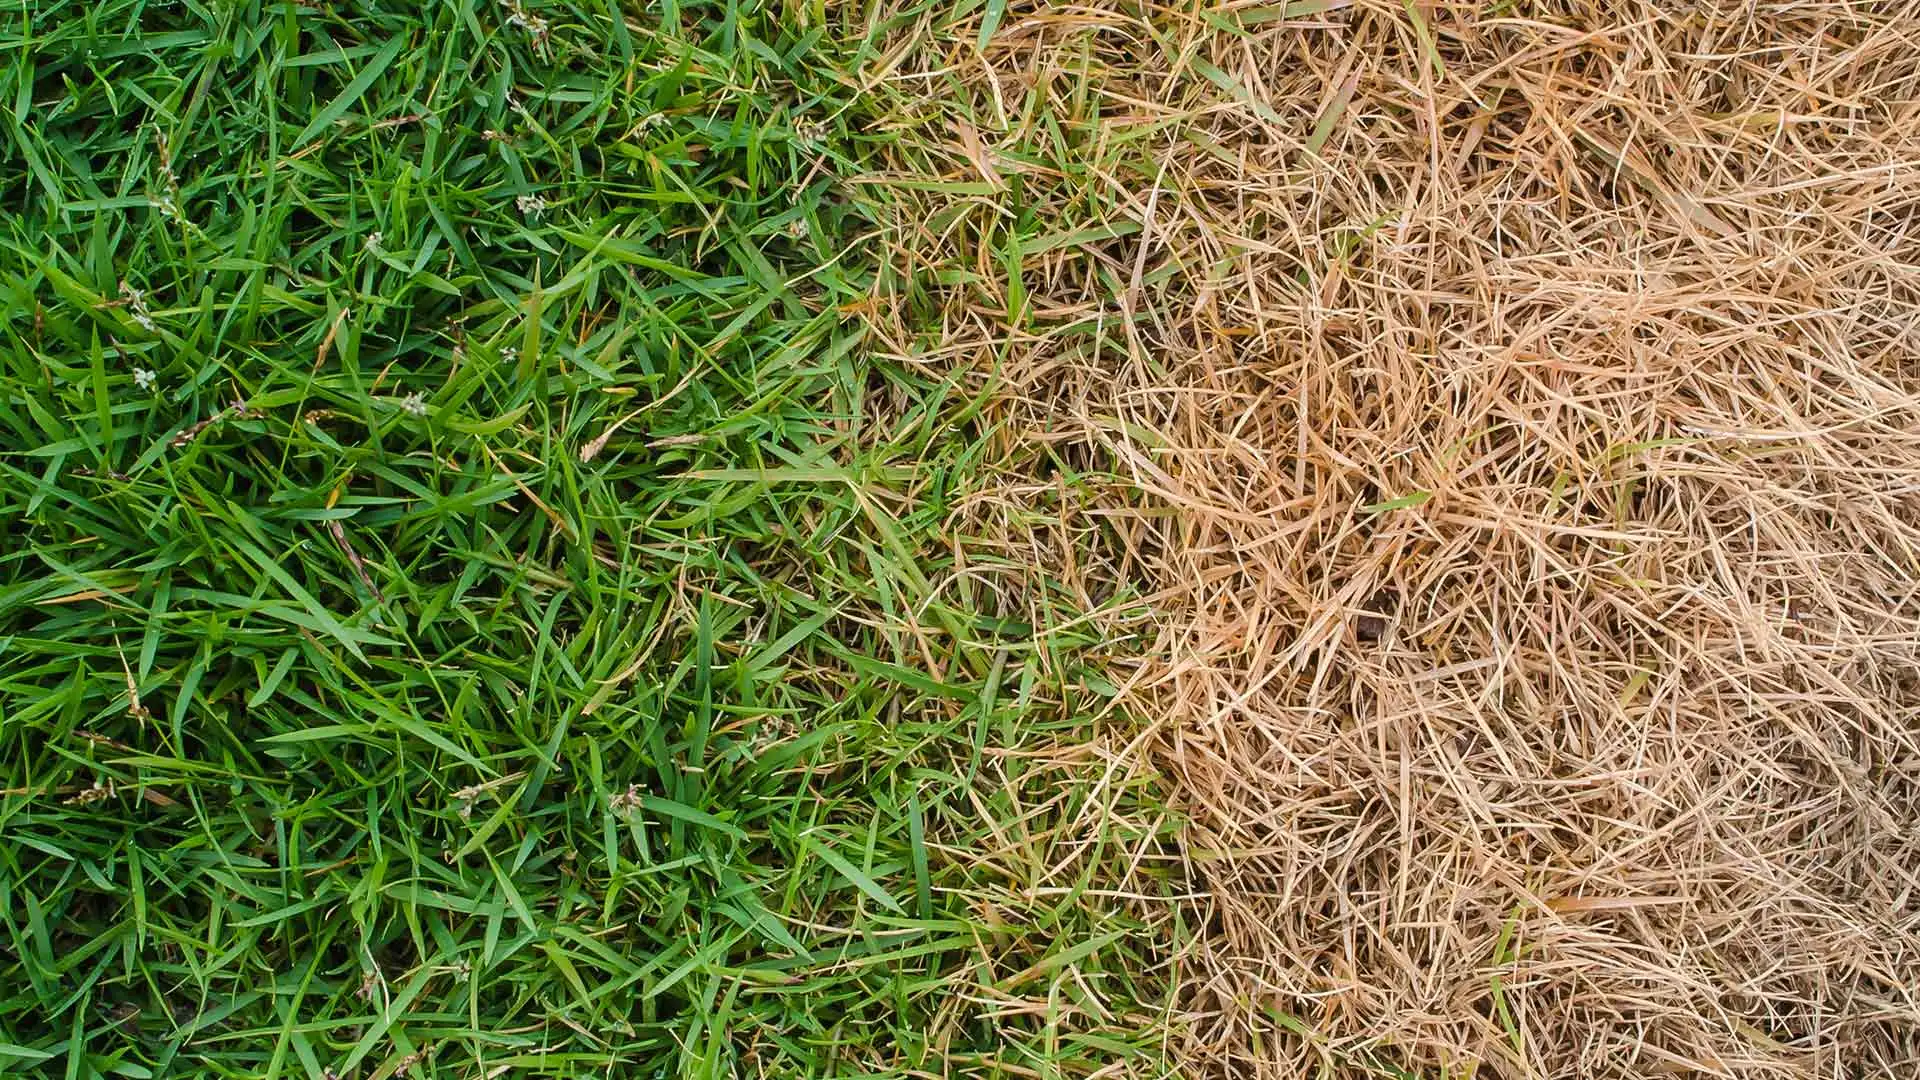 Fertilization & Weed Control - Two Services That Should Always Be Combined